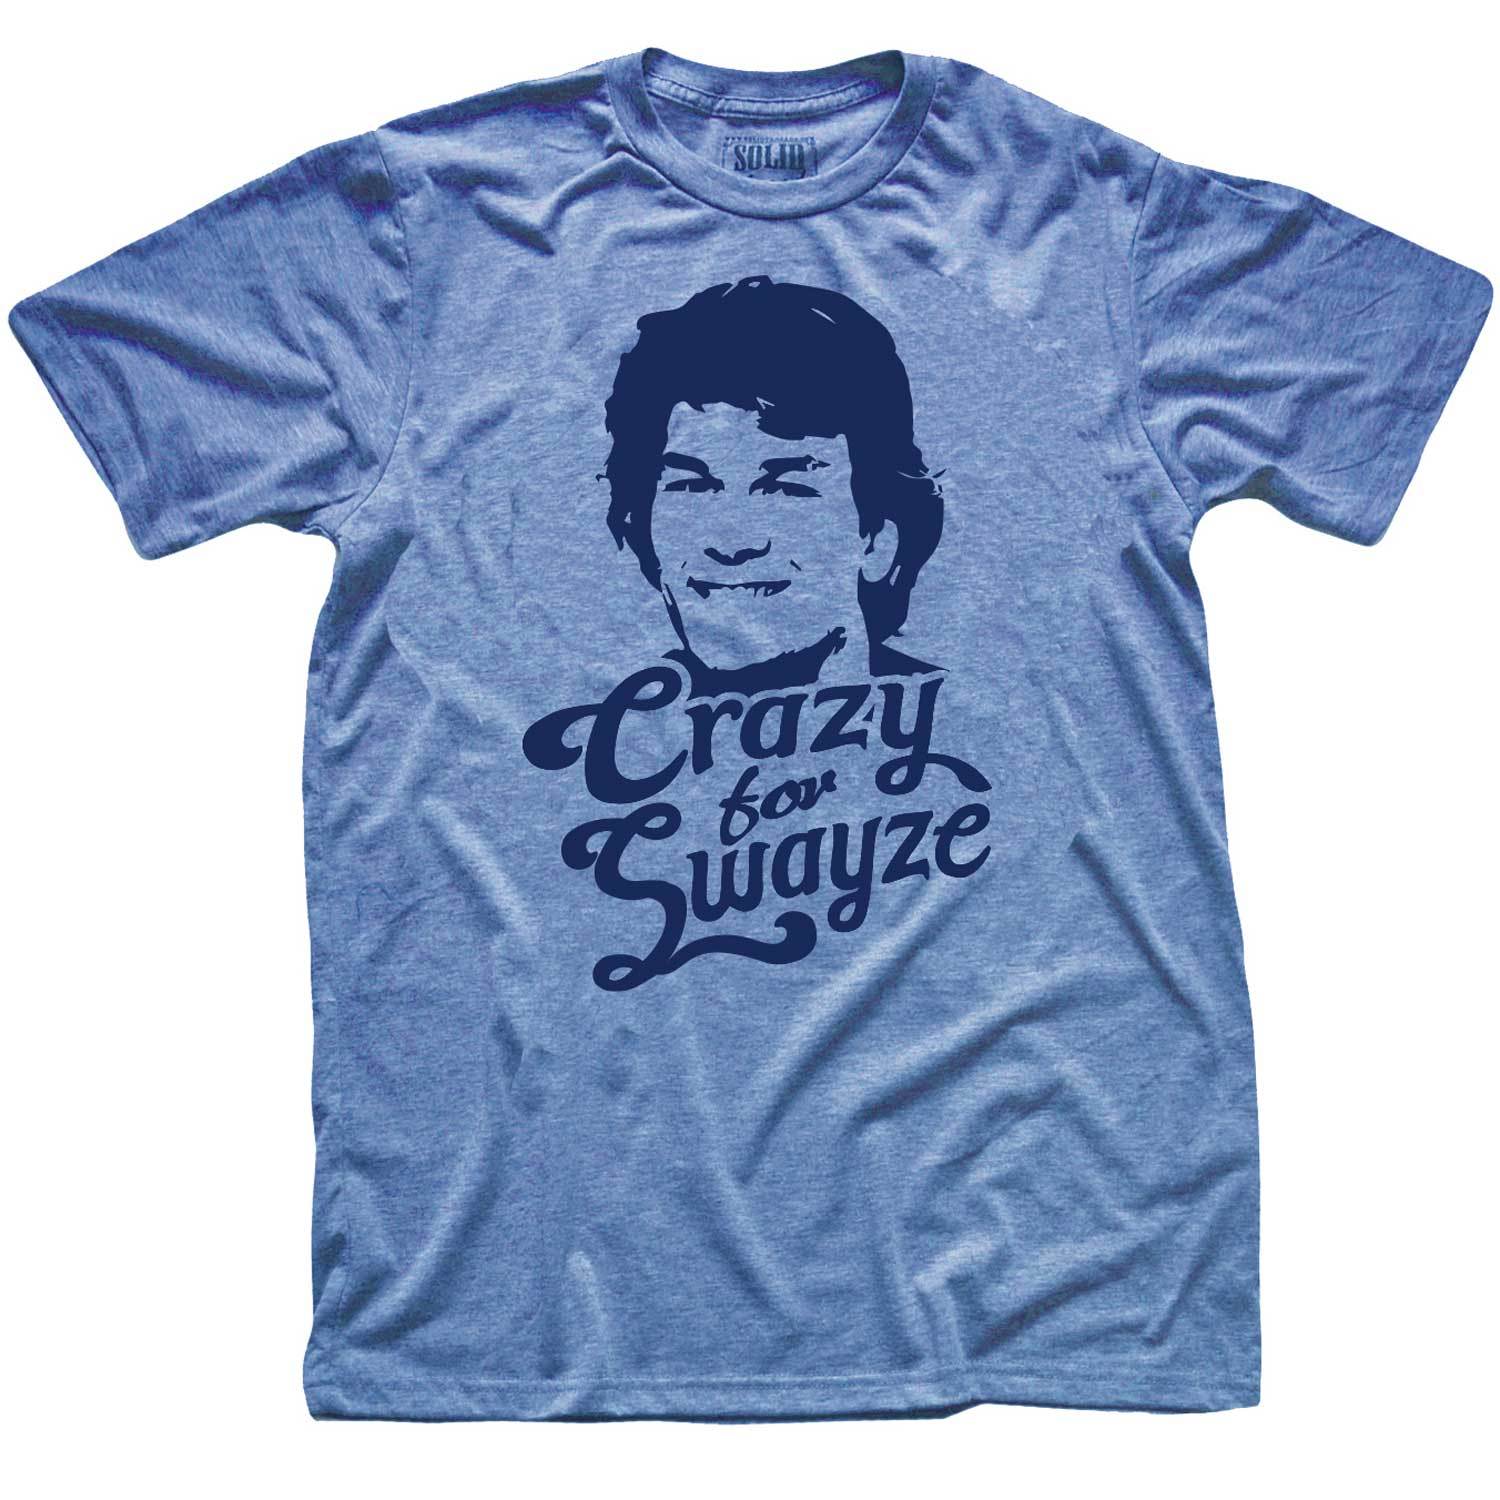 Men's Crazy for Swayze Vintage Graphic Tee | Retro 80s Movie Hearthrob T-Shirt | SOLID THREADS